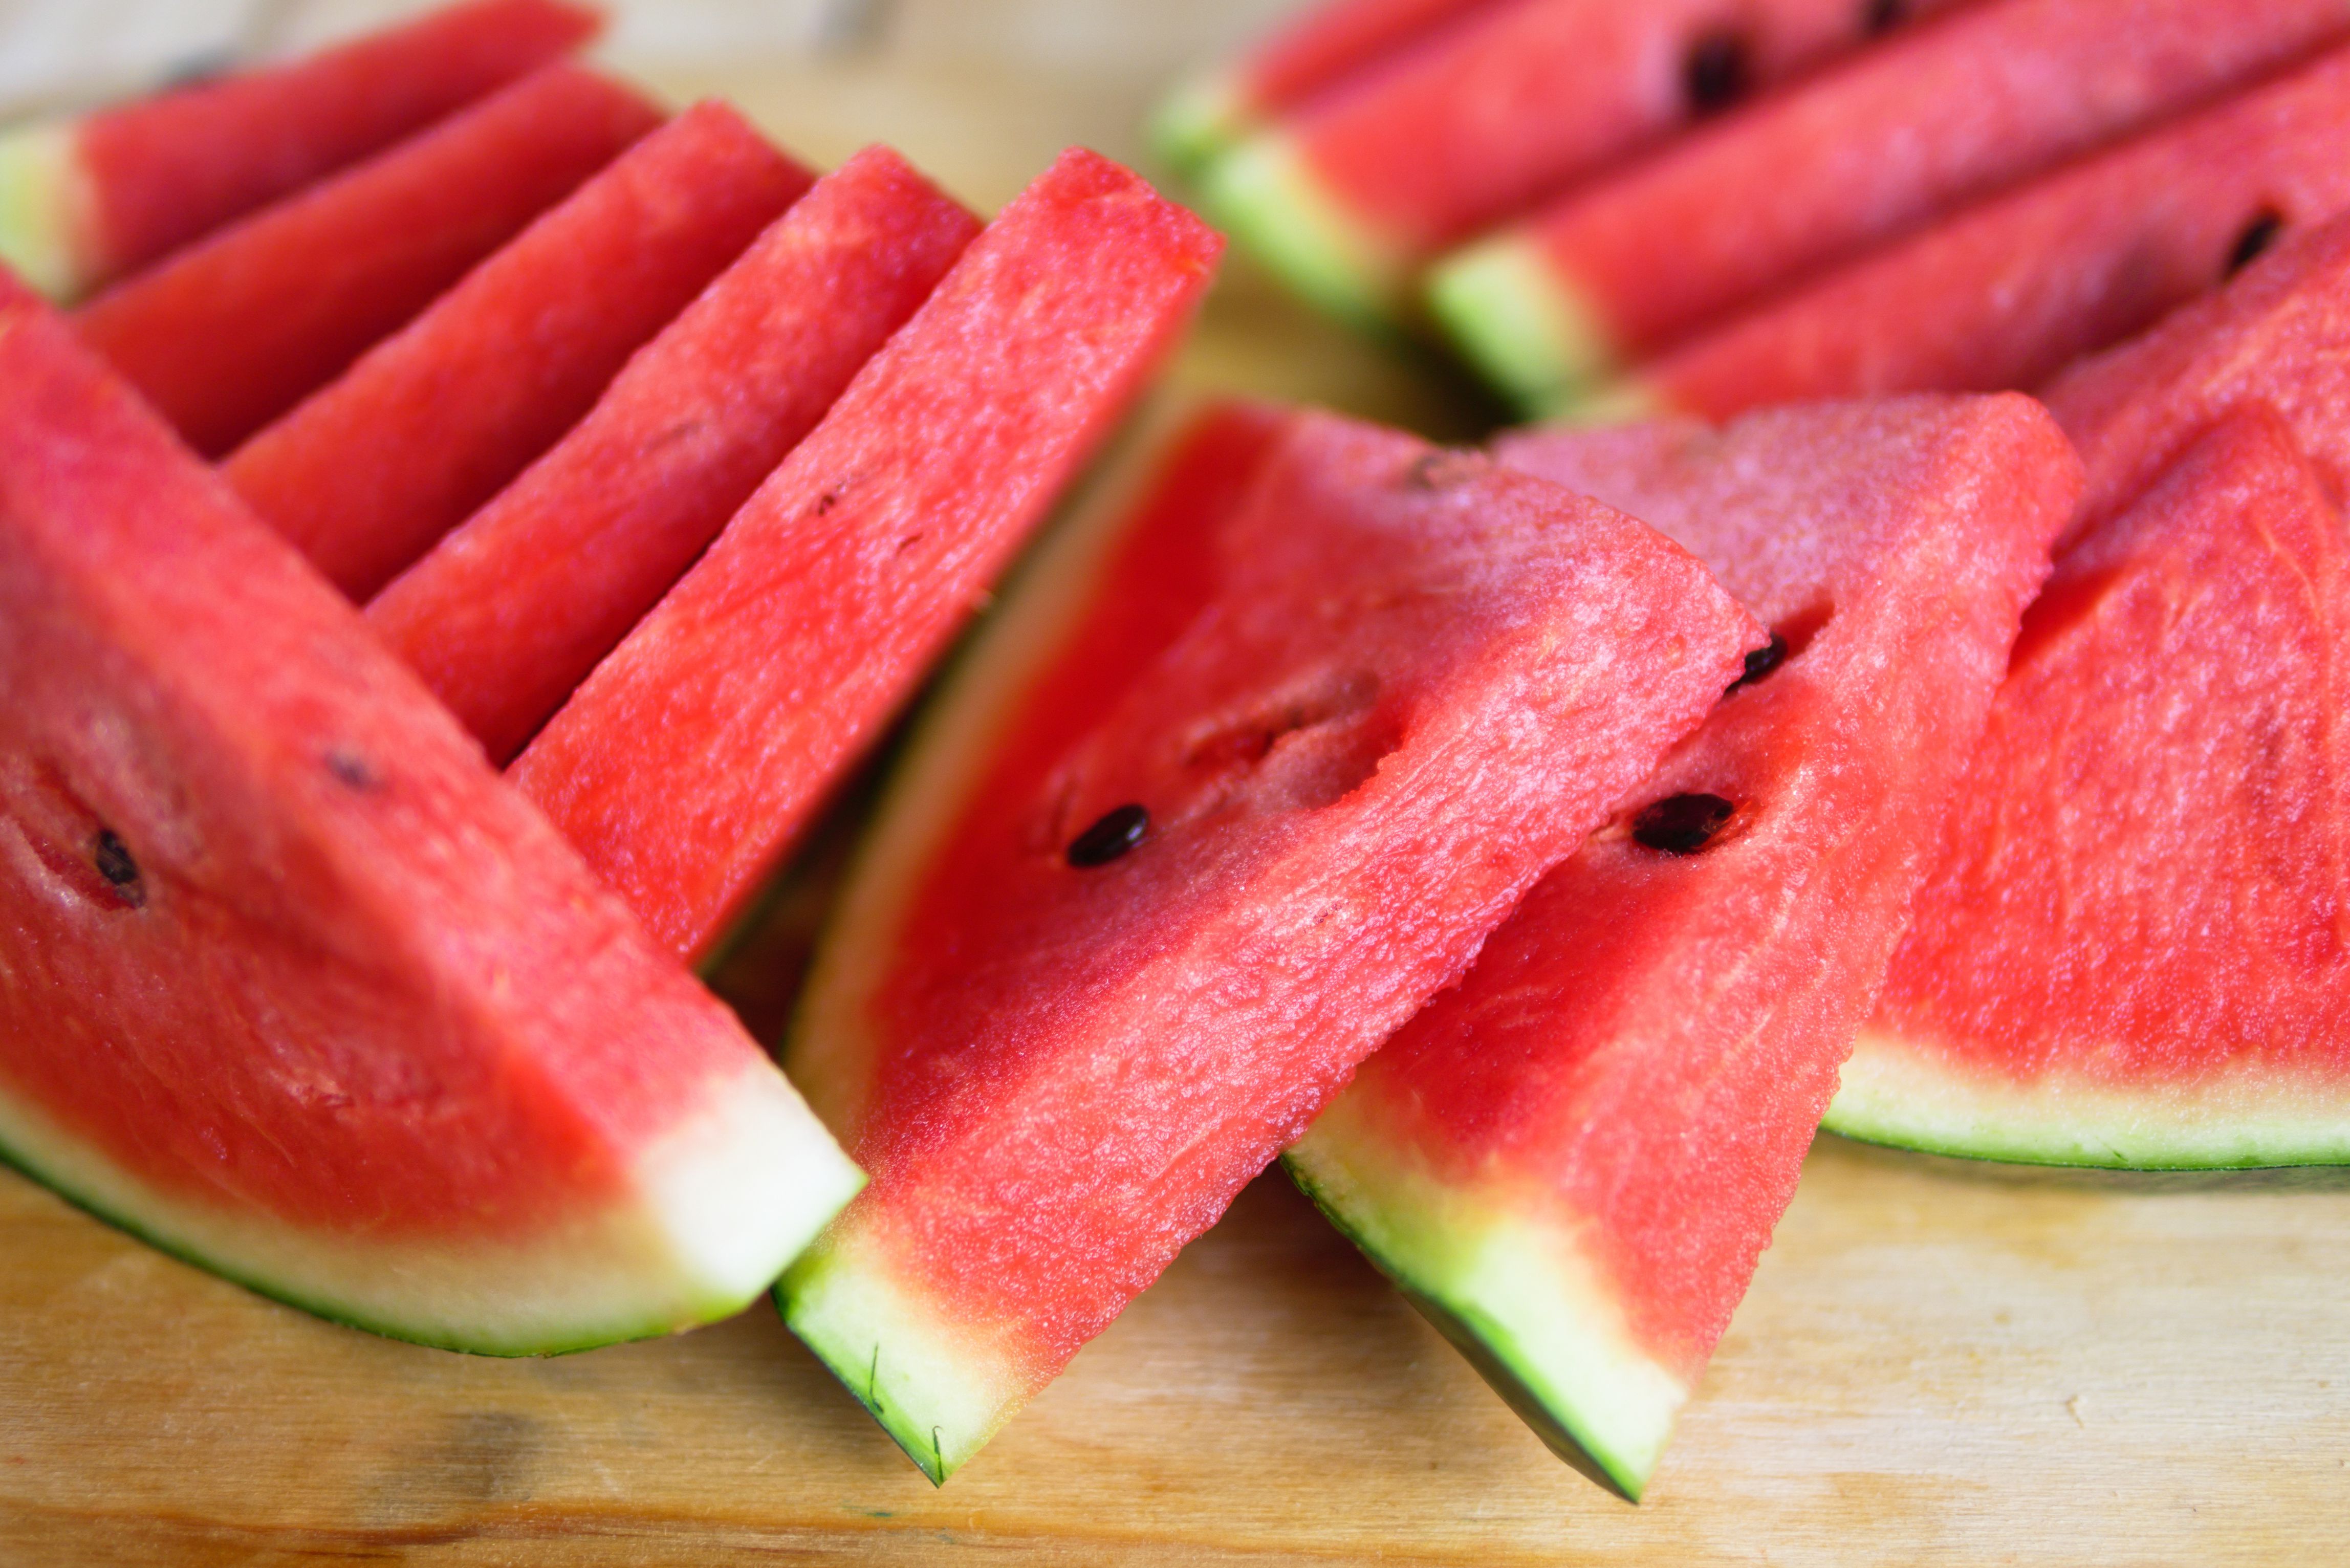 Benefits of Watermelon - Change Your Lifestyle, Change Your Life!